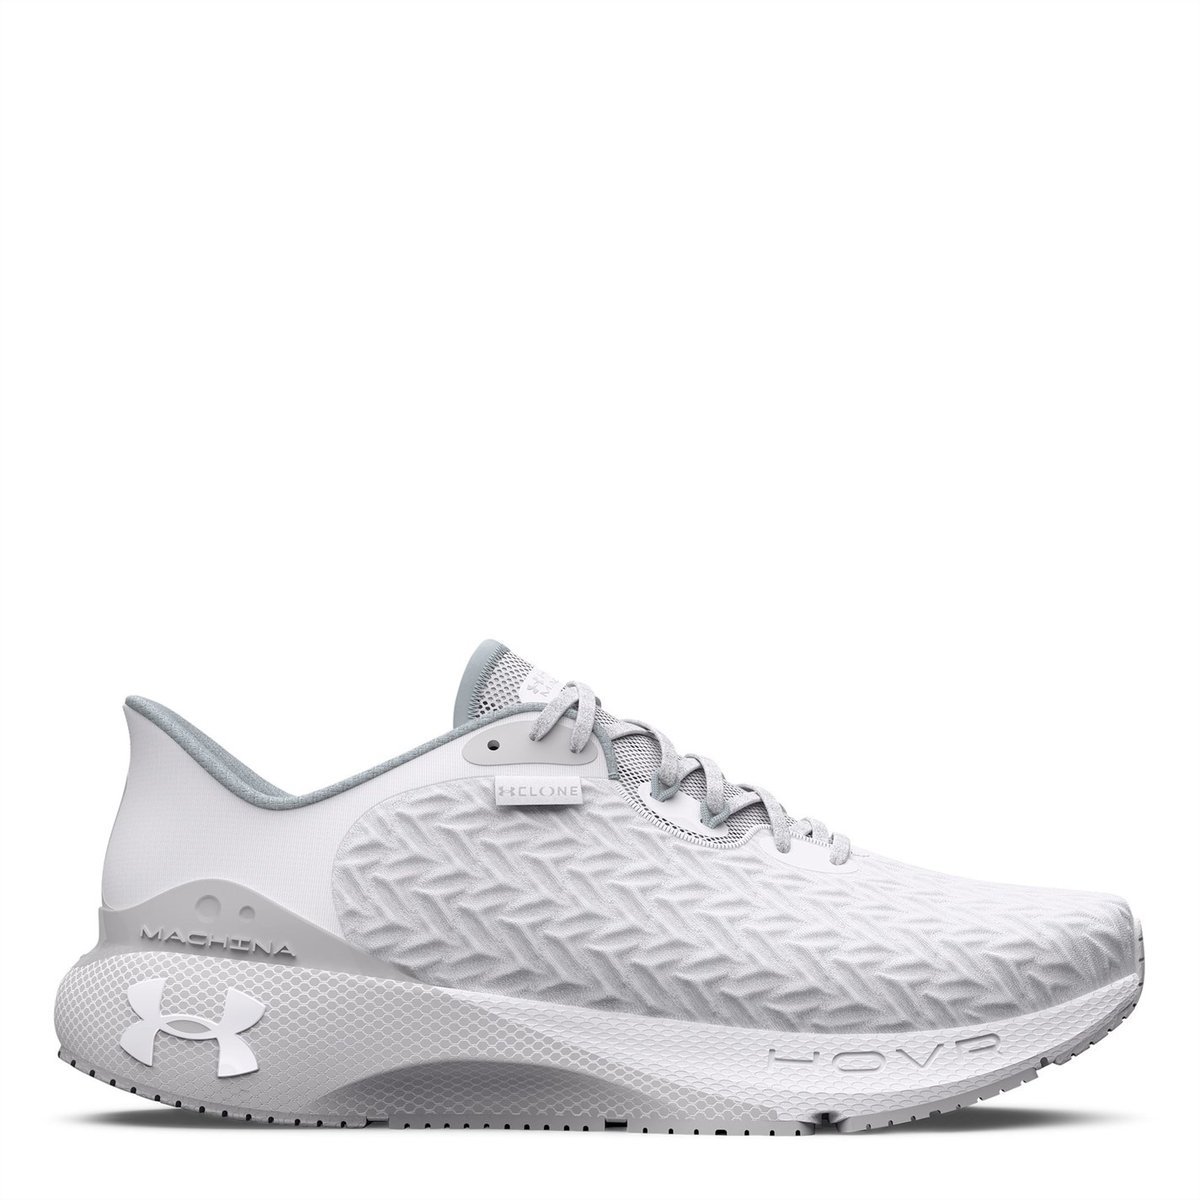 Under Armour Trainers Womens, HOVR, Charged Bandit